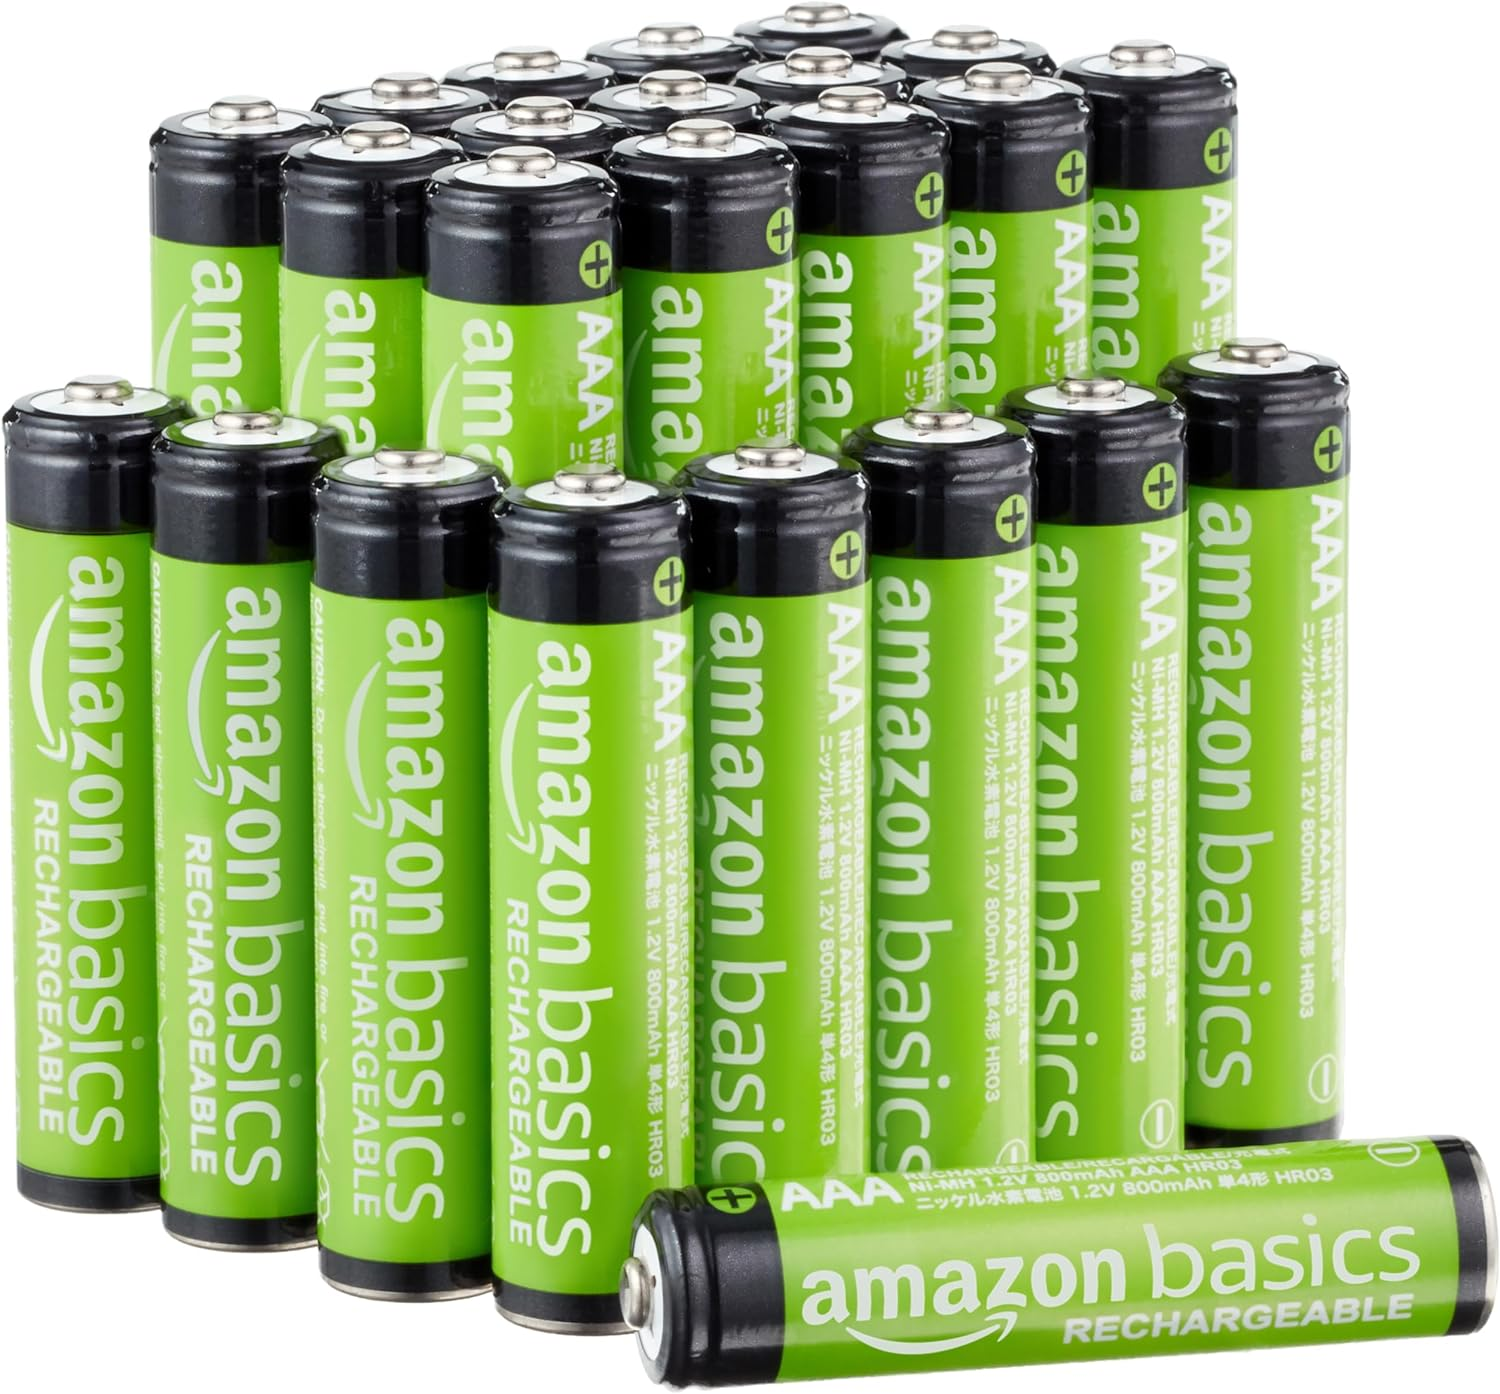 Amazon.com Amazon Basics 24-Pack Rechargeable AAA NiMH Performance Batteries, 800 mAh, Recharge up to 1000x Times, Pre-C